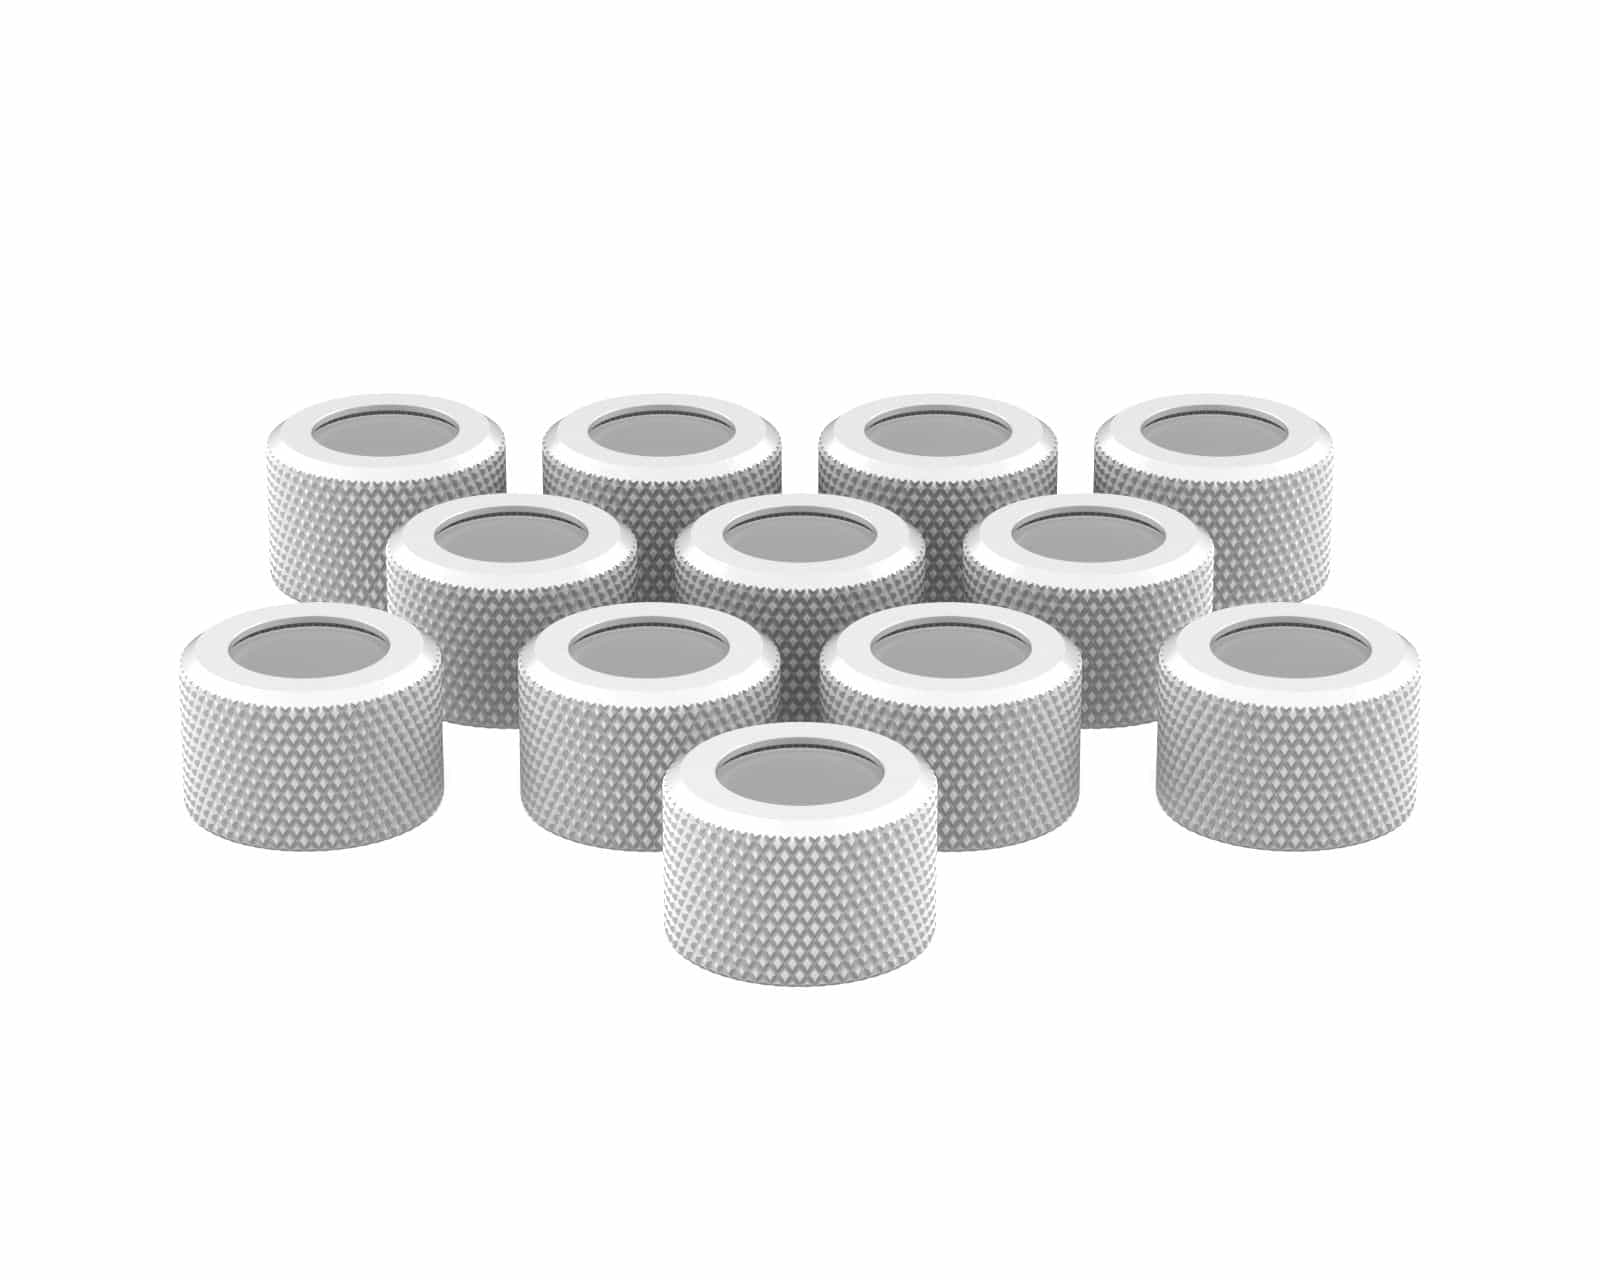 PrimoChill RMSX Replacement Cap Switch Over Kit - 14mm - PrimoChill - KEEPING IT COOL Sky White